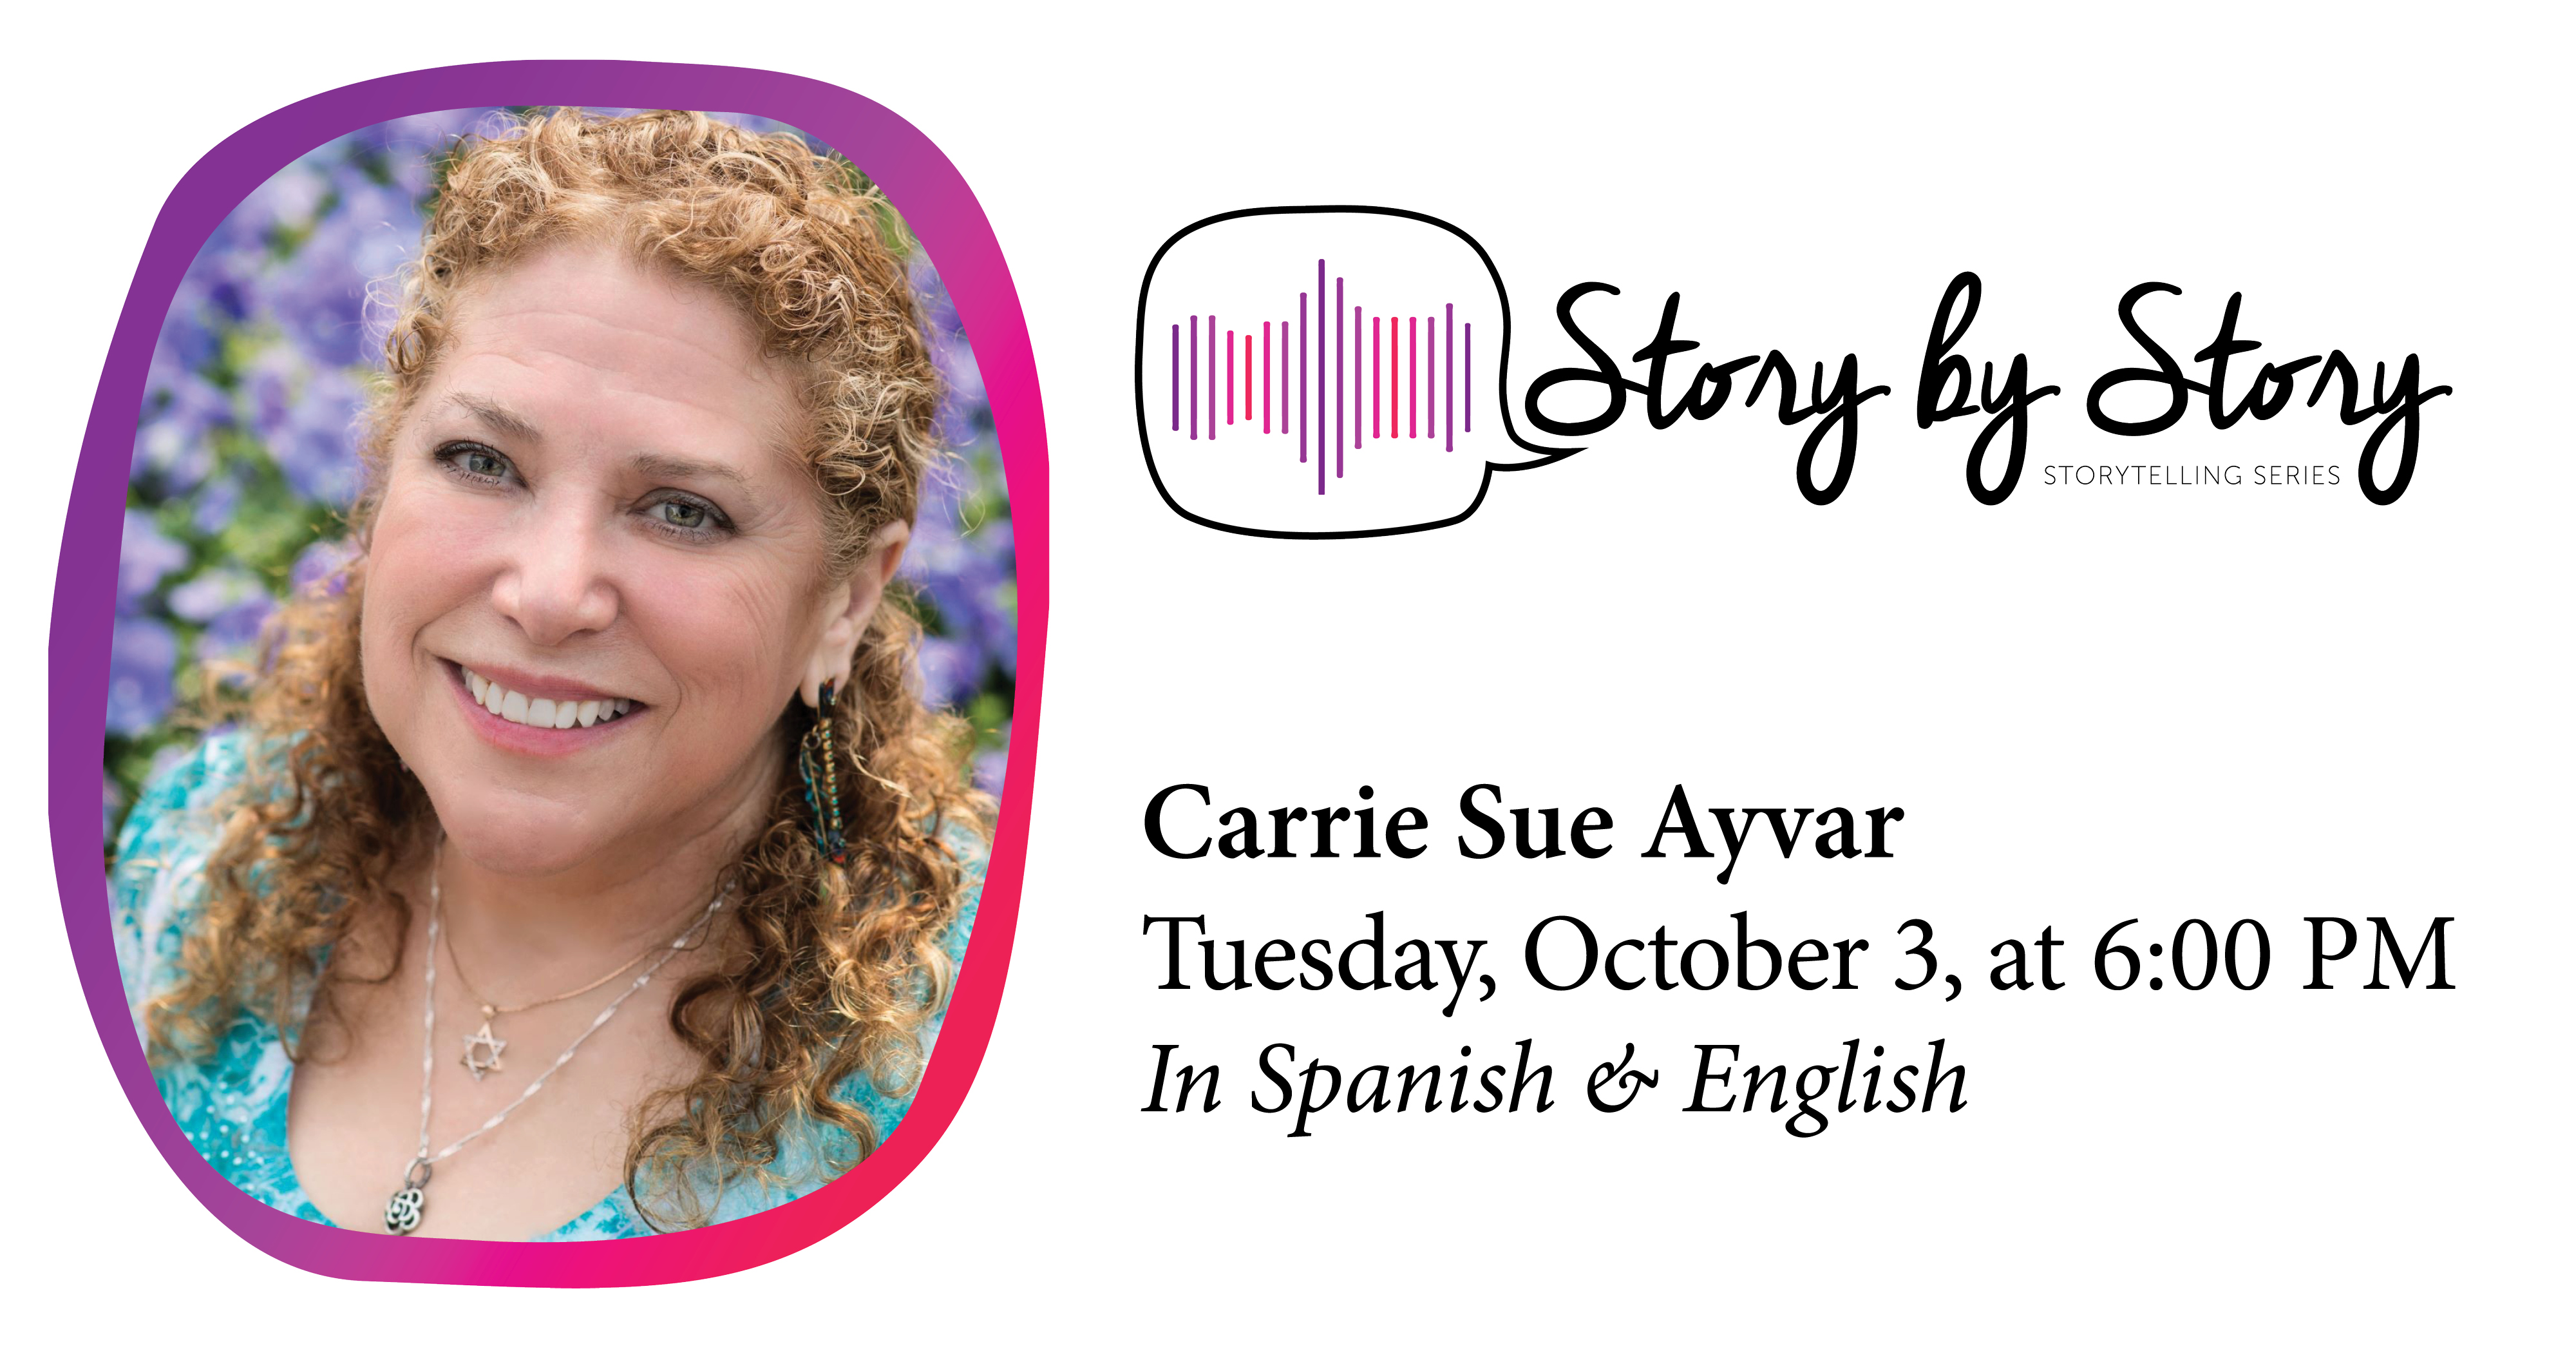 Carrie Sue Ayvar - Story by Story